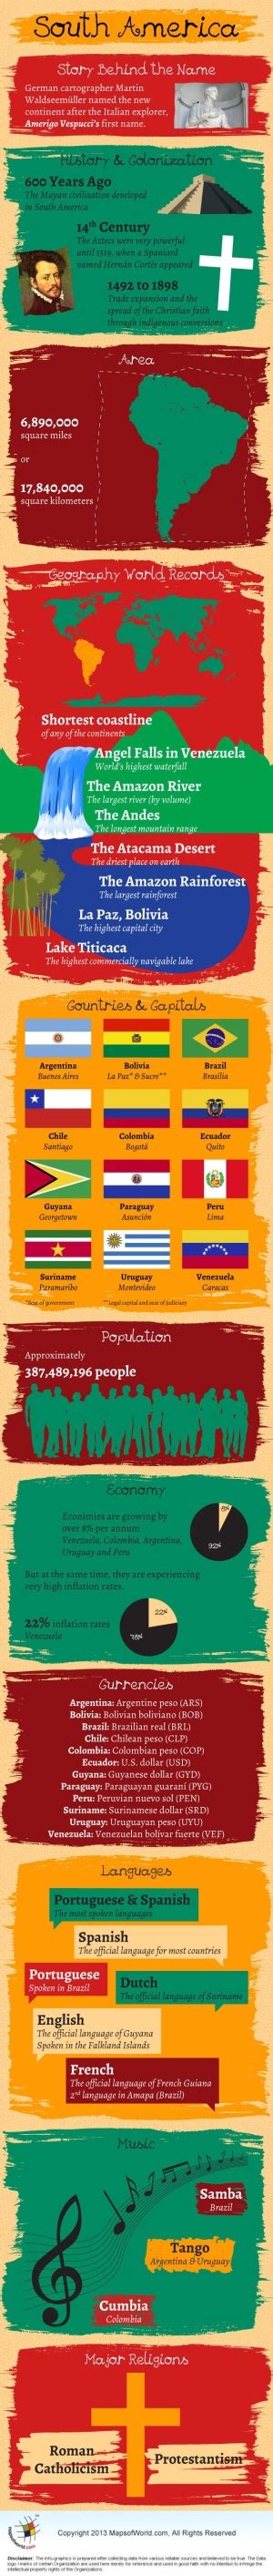 Everyone Deserves A Perfect World South America Facts South America